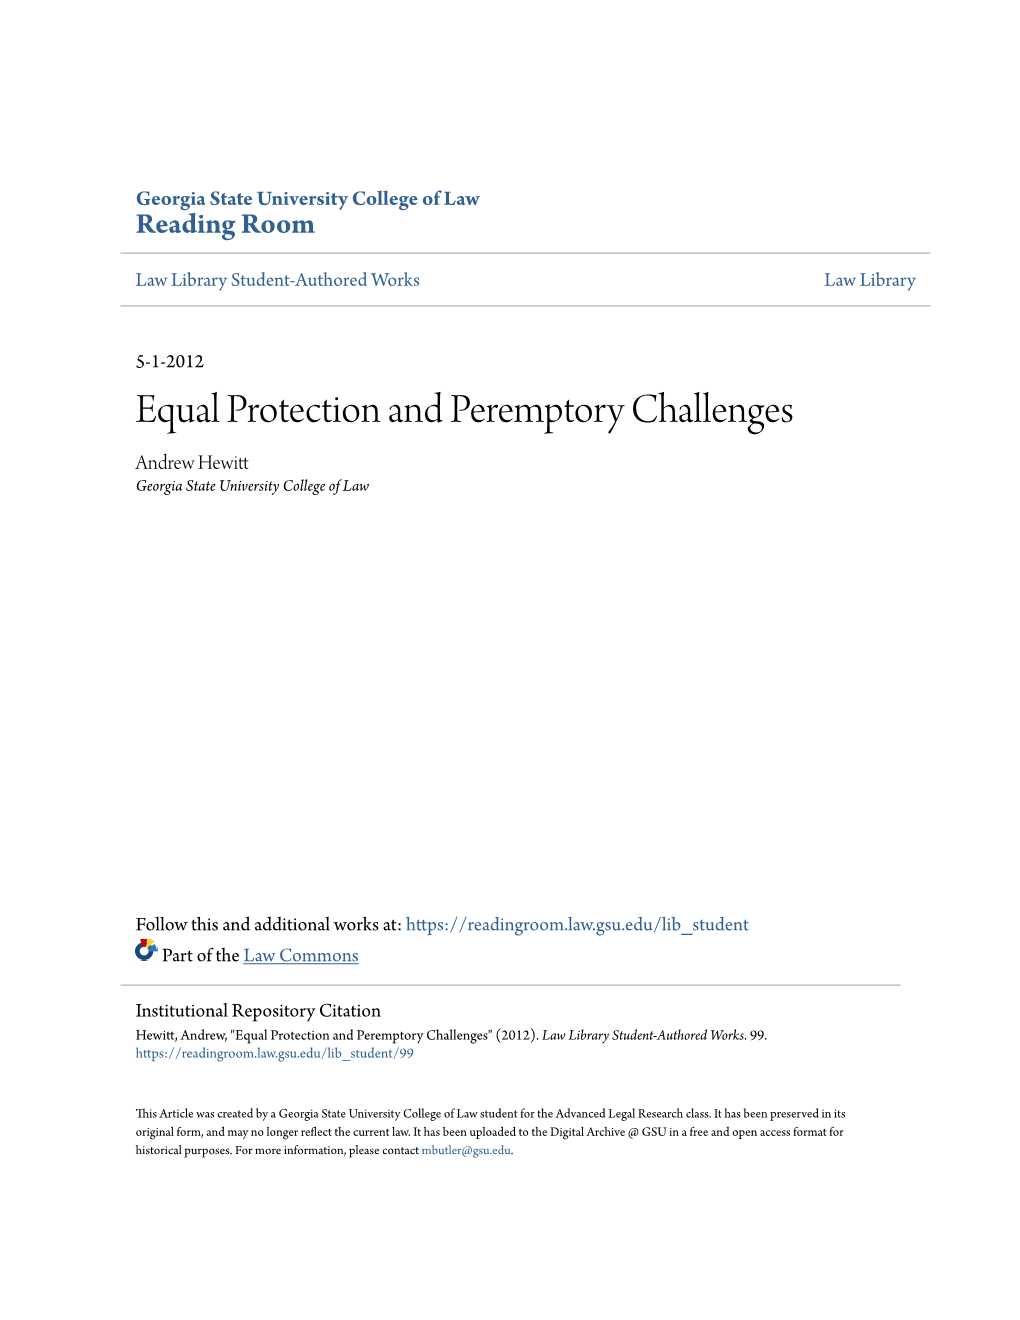 Equal Protection and Peremptory Challenges Andrew Hewitt Georgia State University College of Law